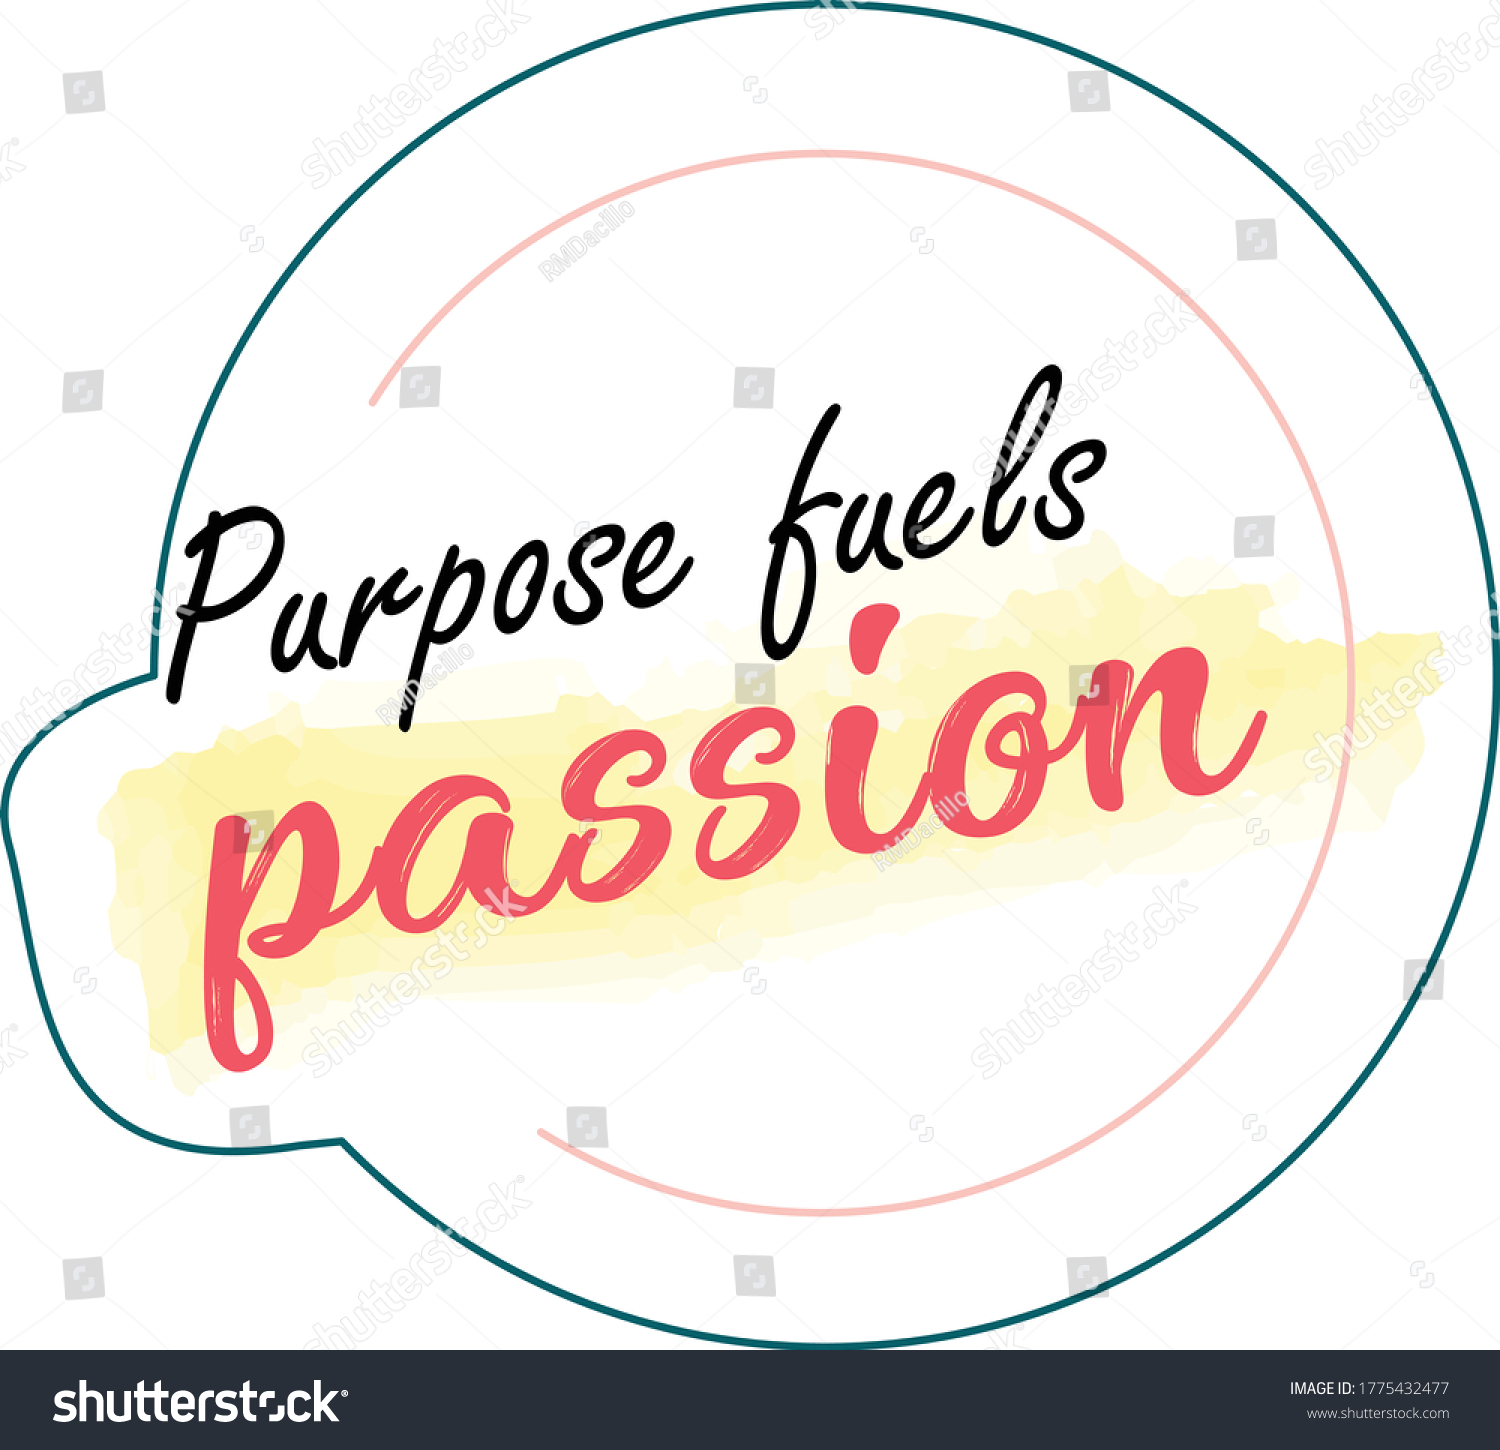 Purpose Fuels Passion Typography Design Stock Vector Royalty Free